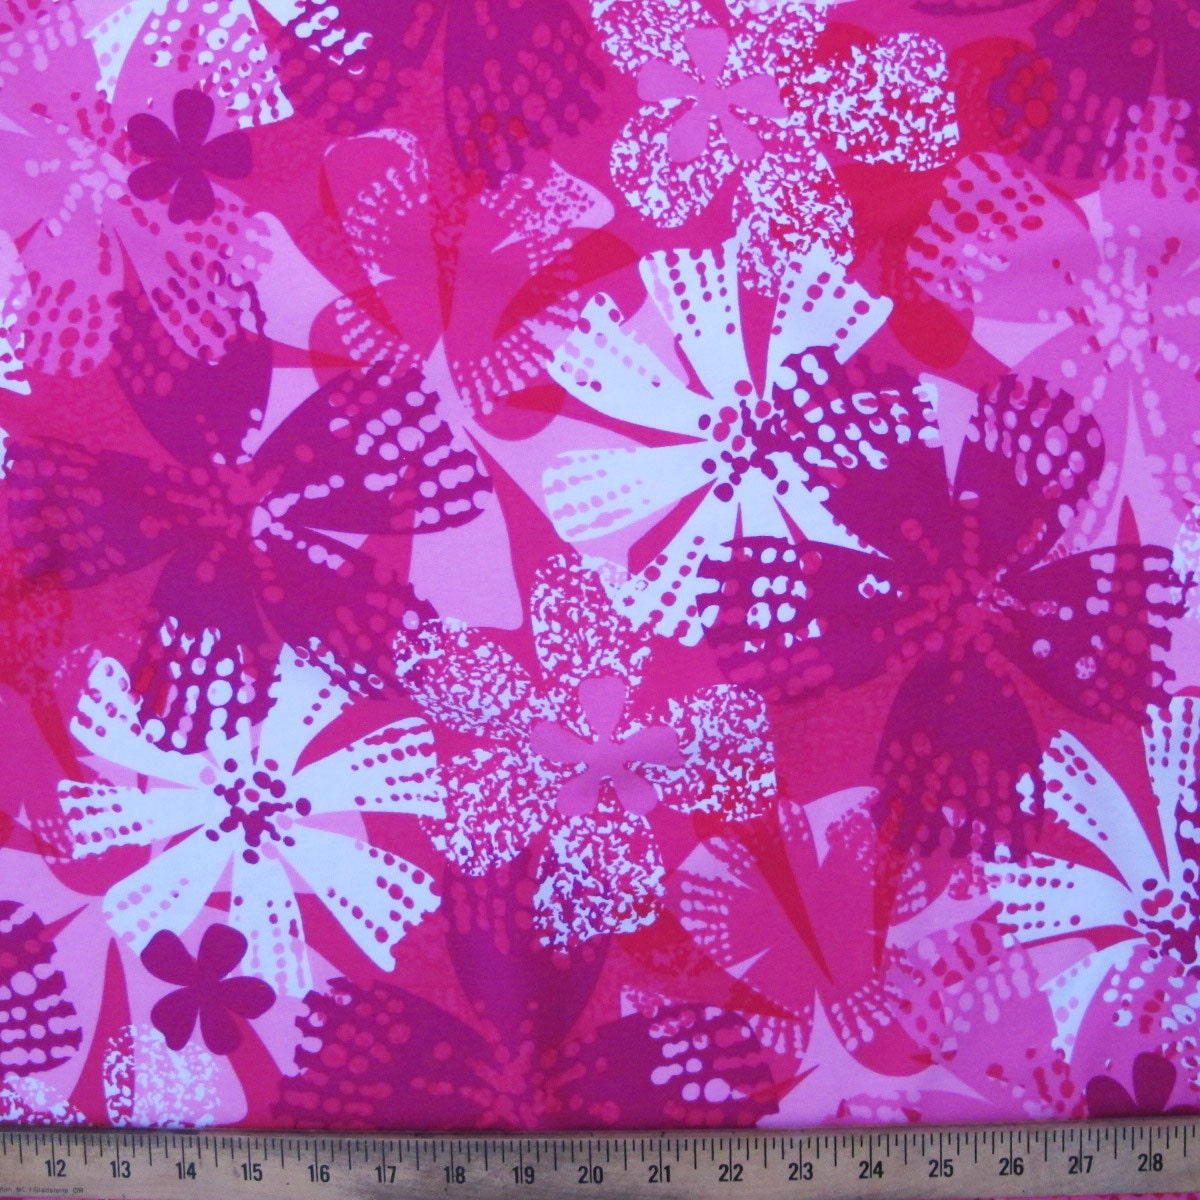 Lycra Spandex Fabric Material Pink white purple floral